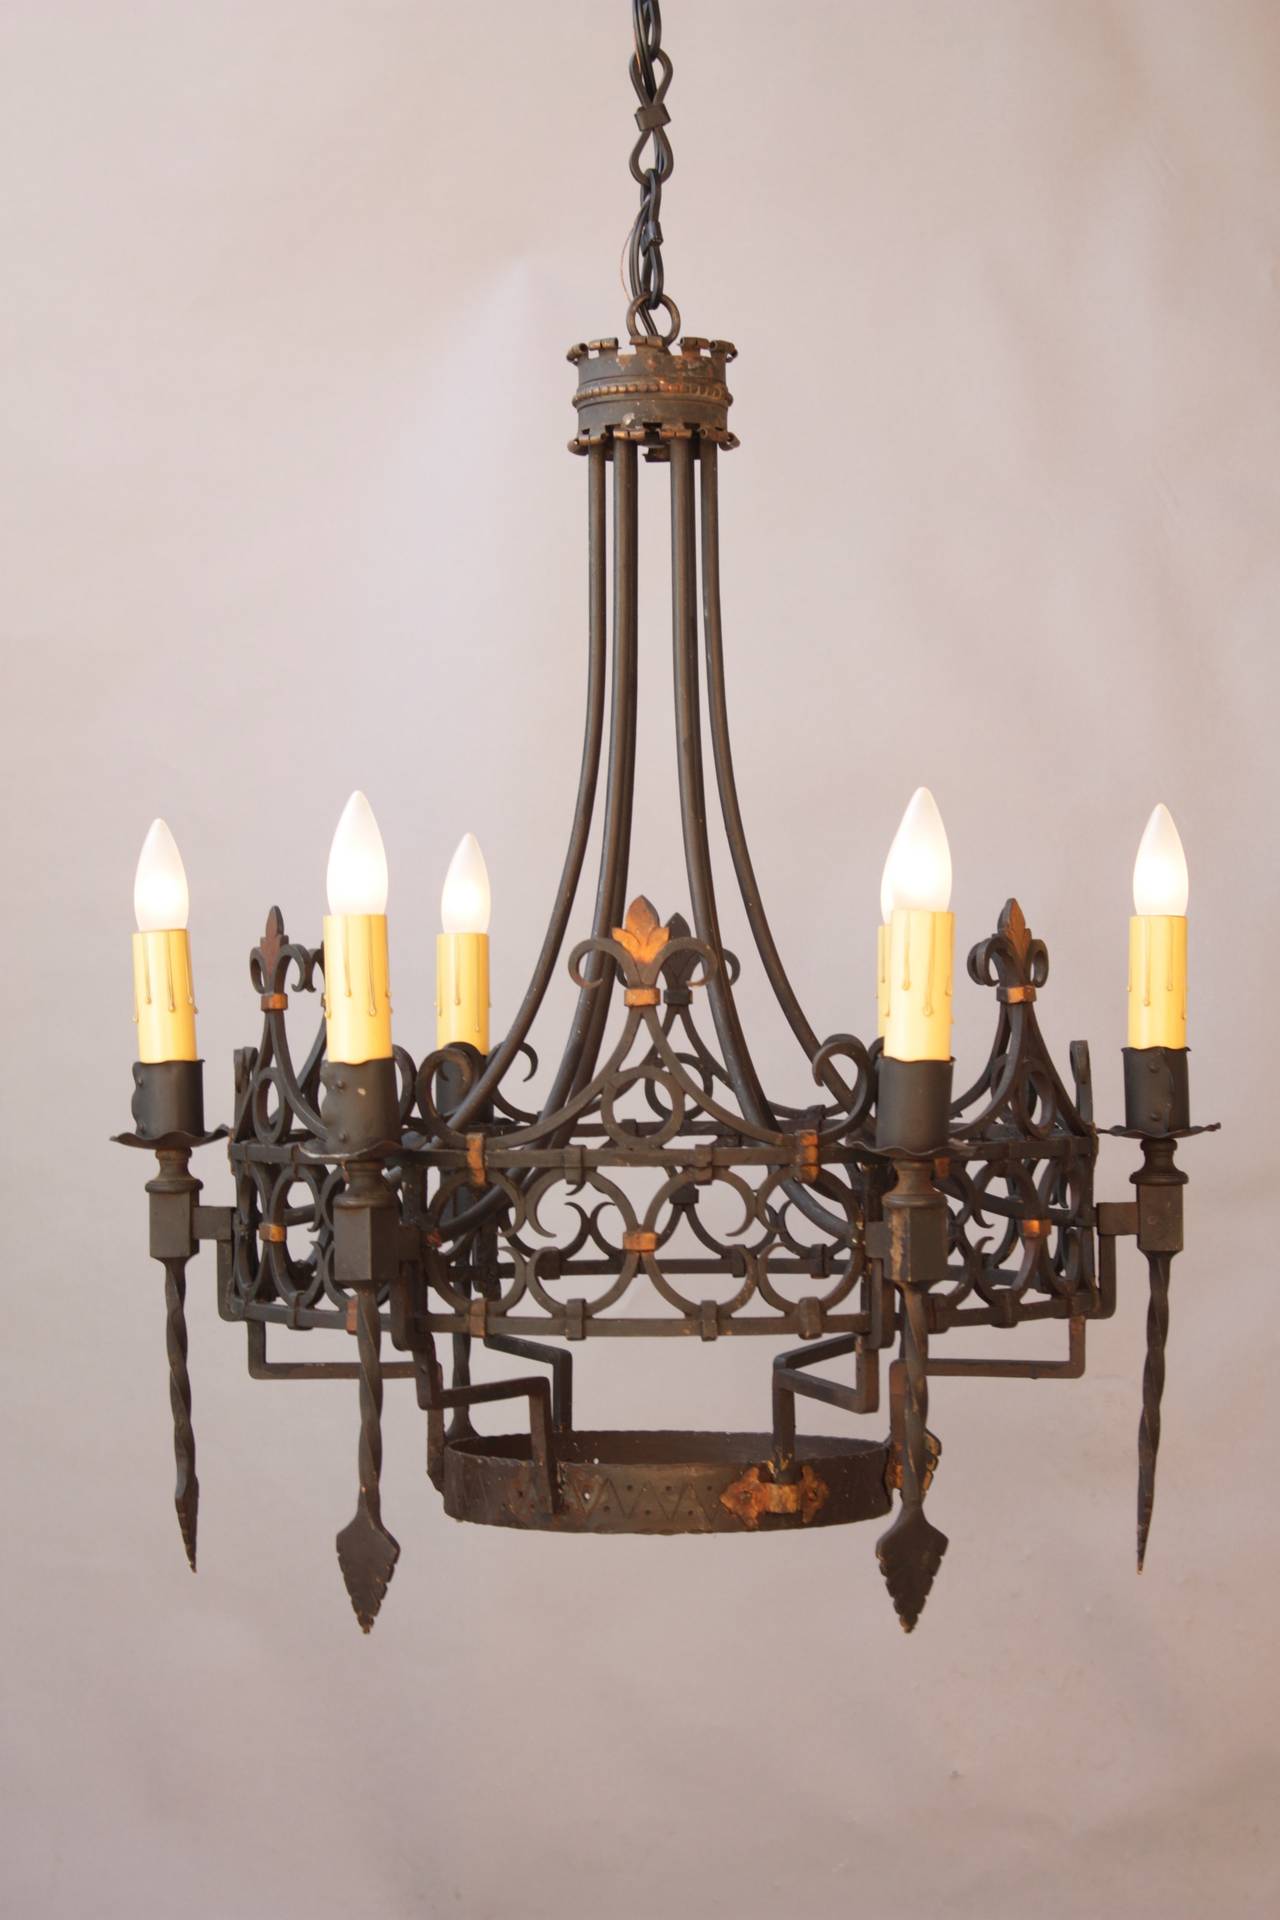 North American Hard to Find Larger Scale Spanish Revival Chandelier, circa 1920s